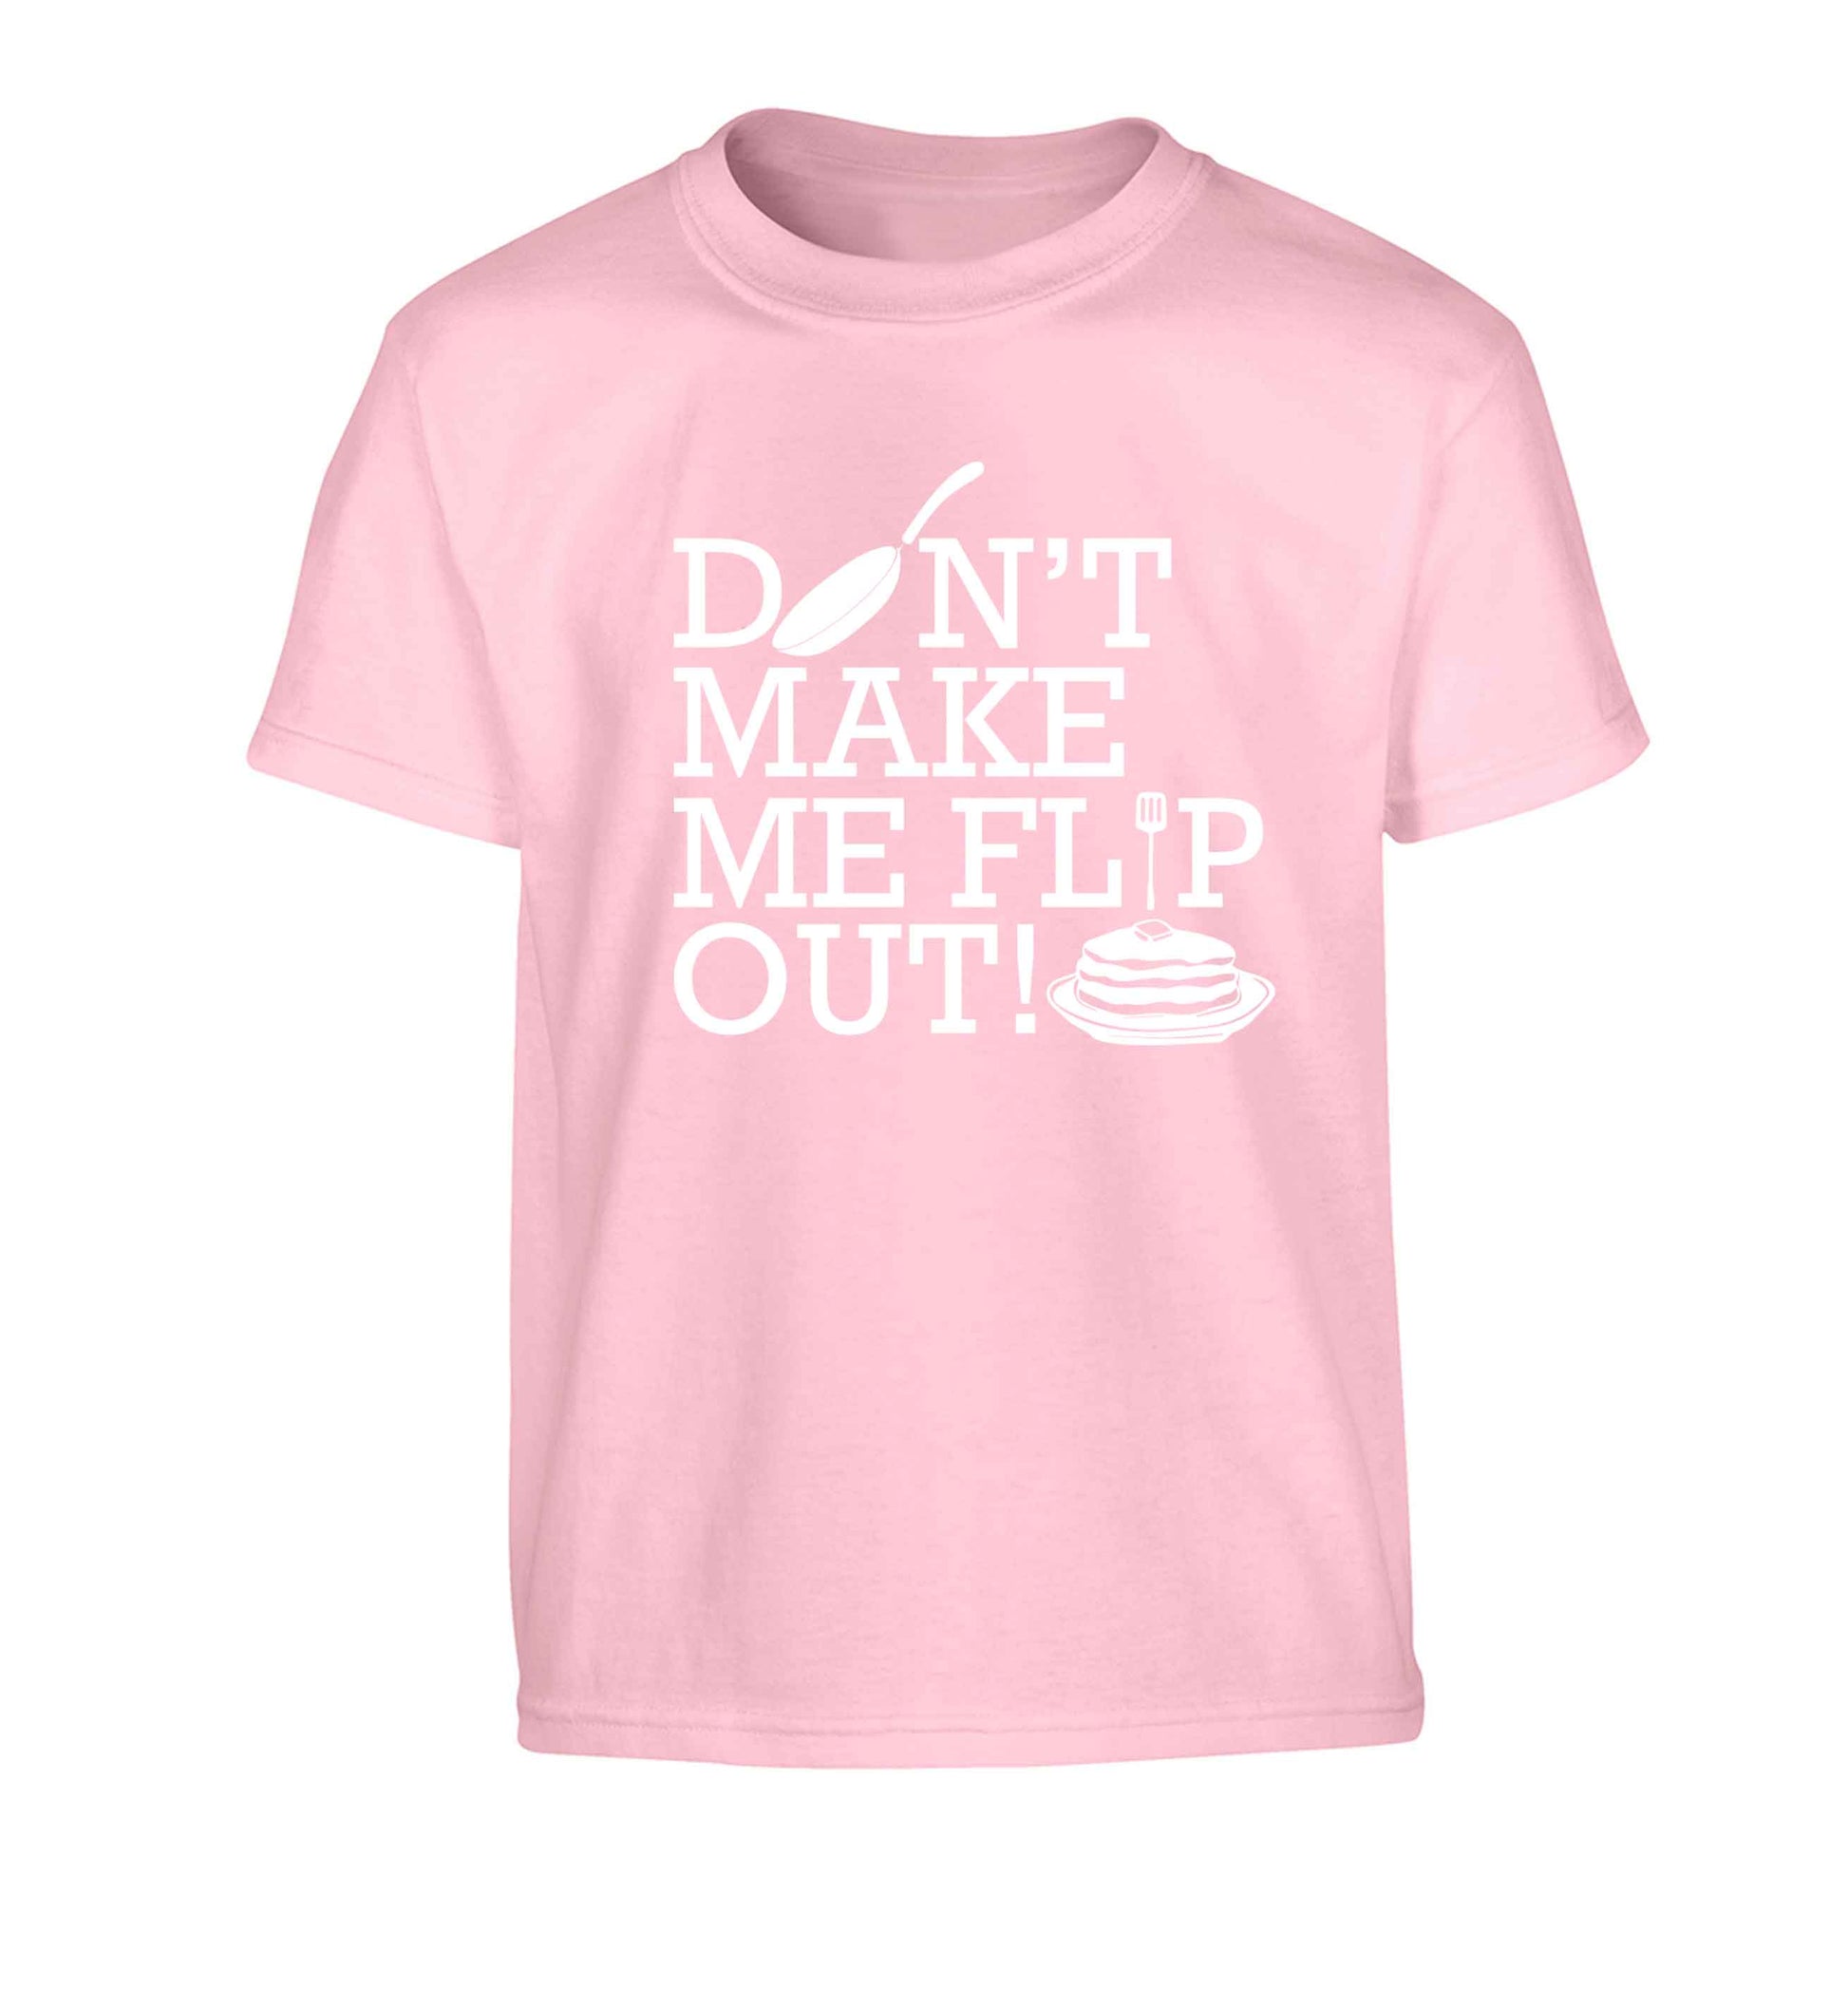 Don't make me flip out Children's light pink Tshirt 12-13 Years